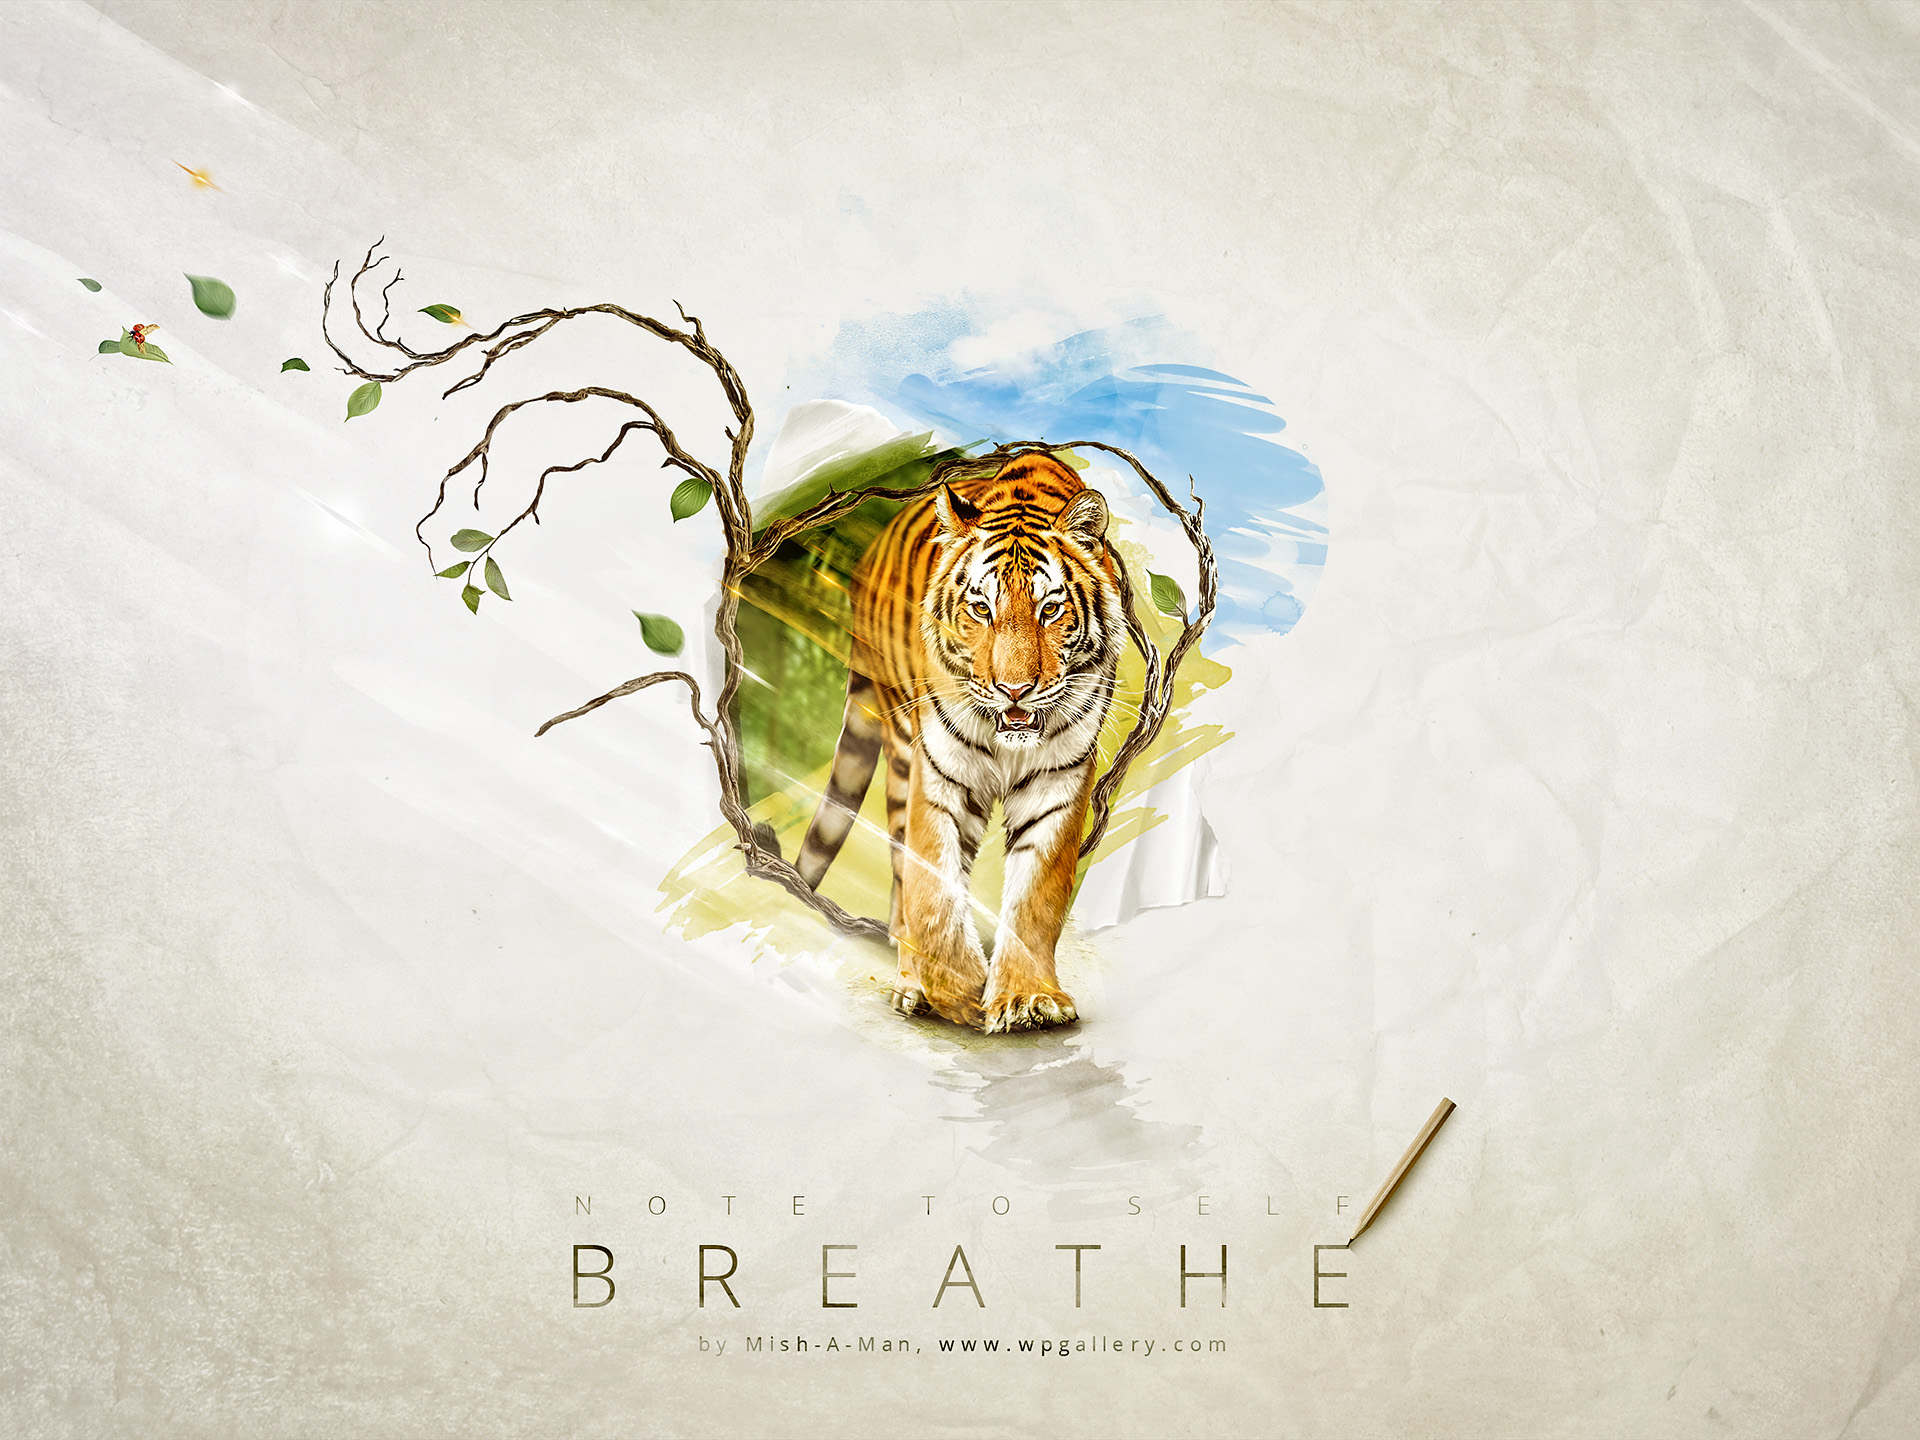 Breathe by Mish-A-Man